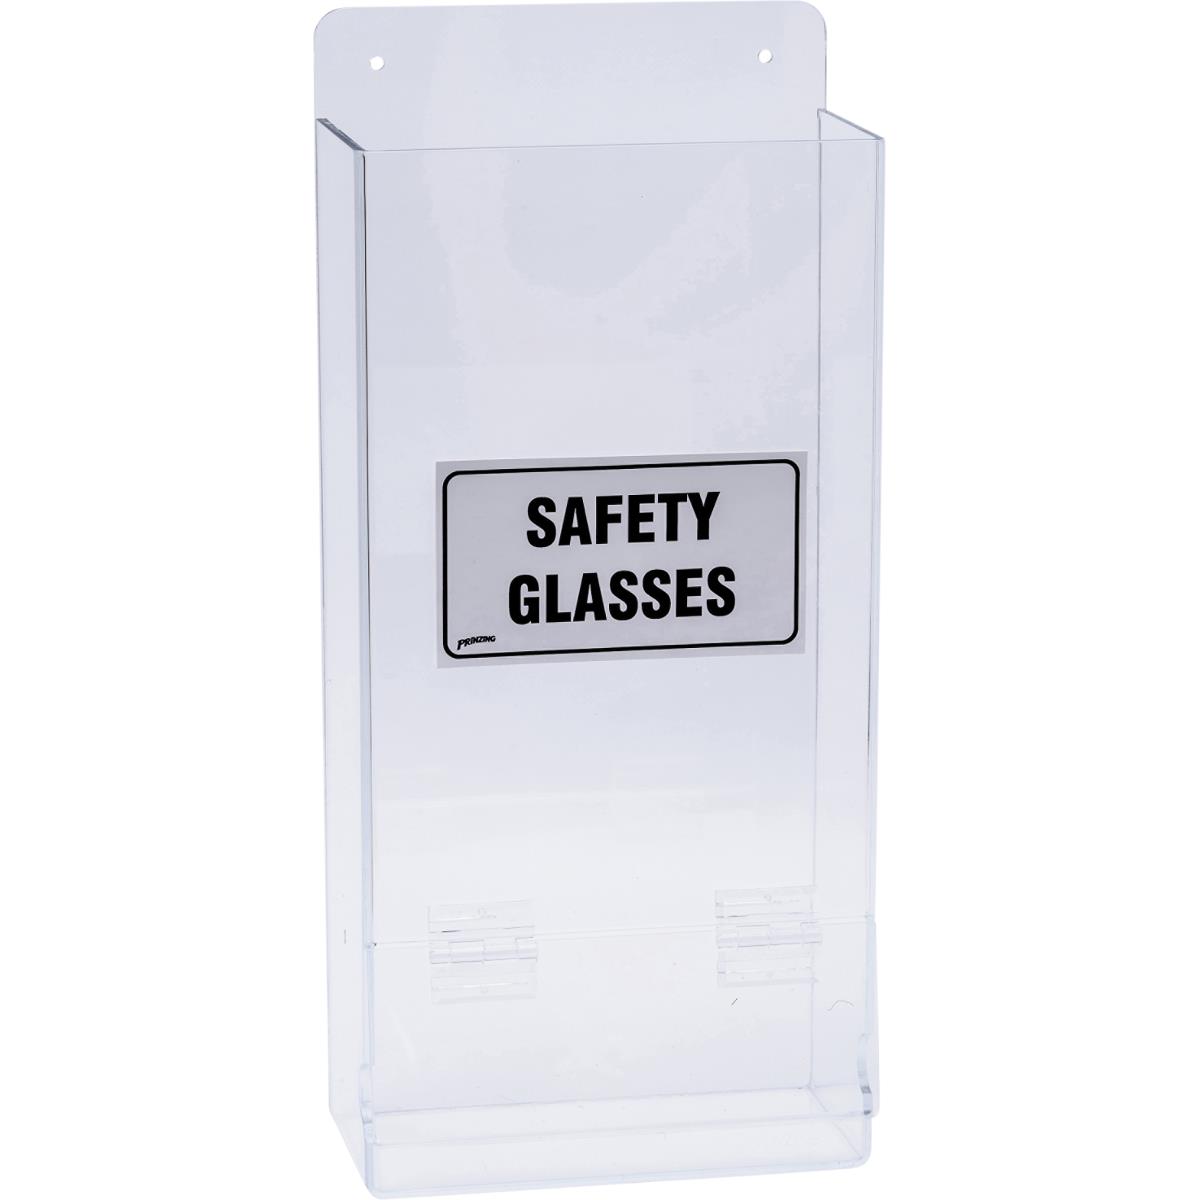 ECONOMY WALL MOUNT EYEGLASS DISPENSER - Sideshields and Accessories